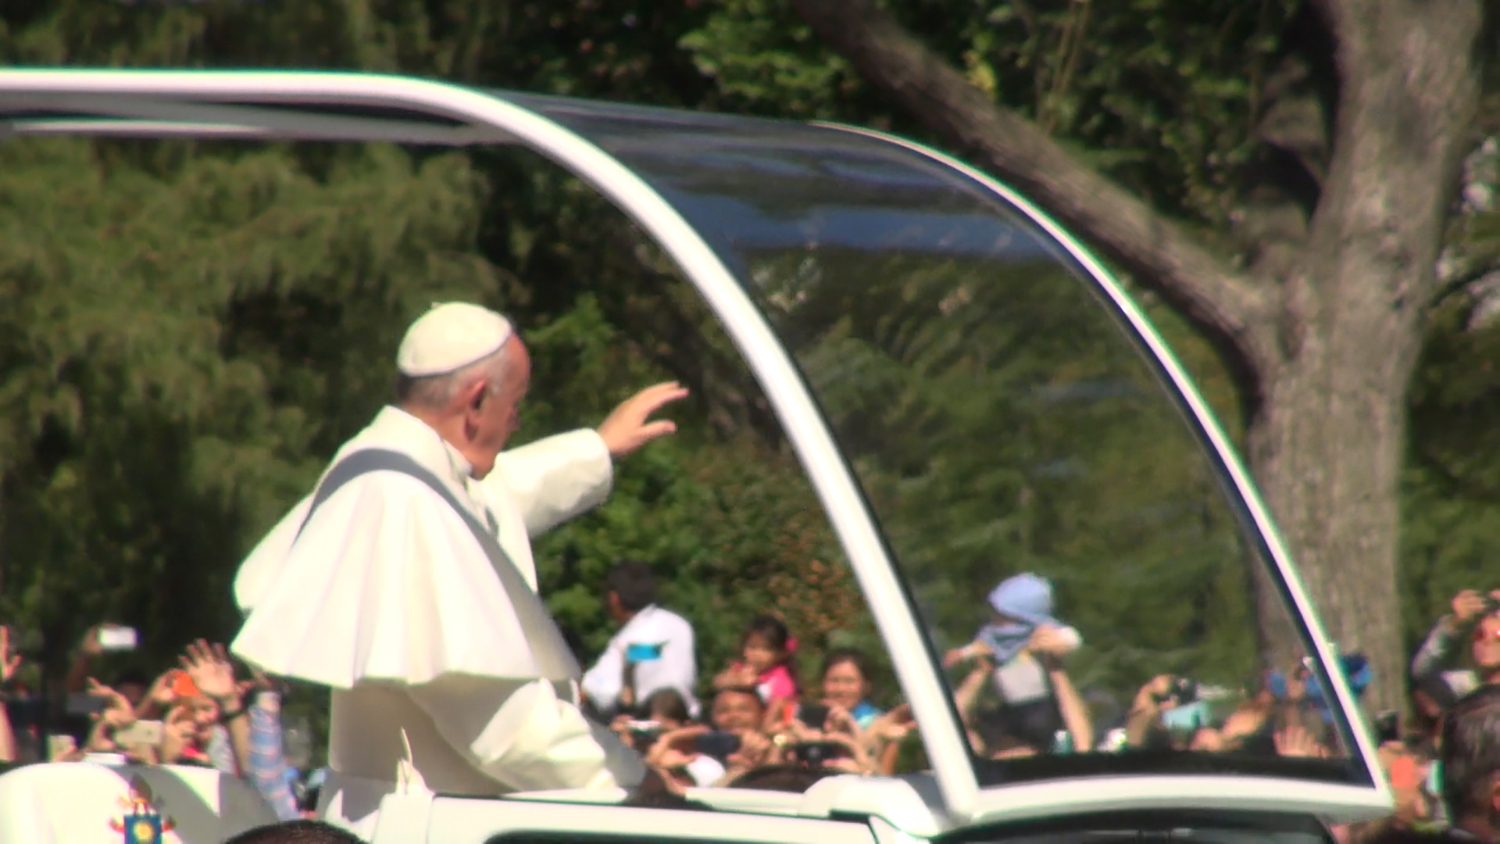 VIDEO MONTAGE: Pope Francis’ parade